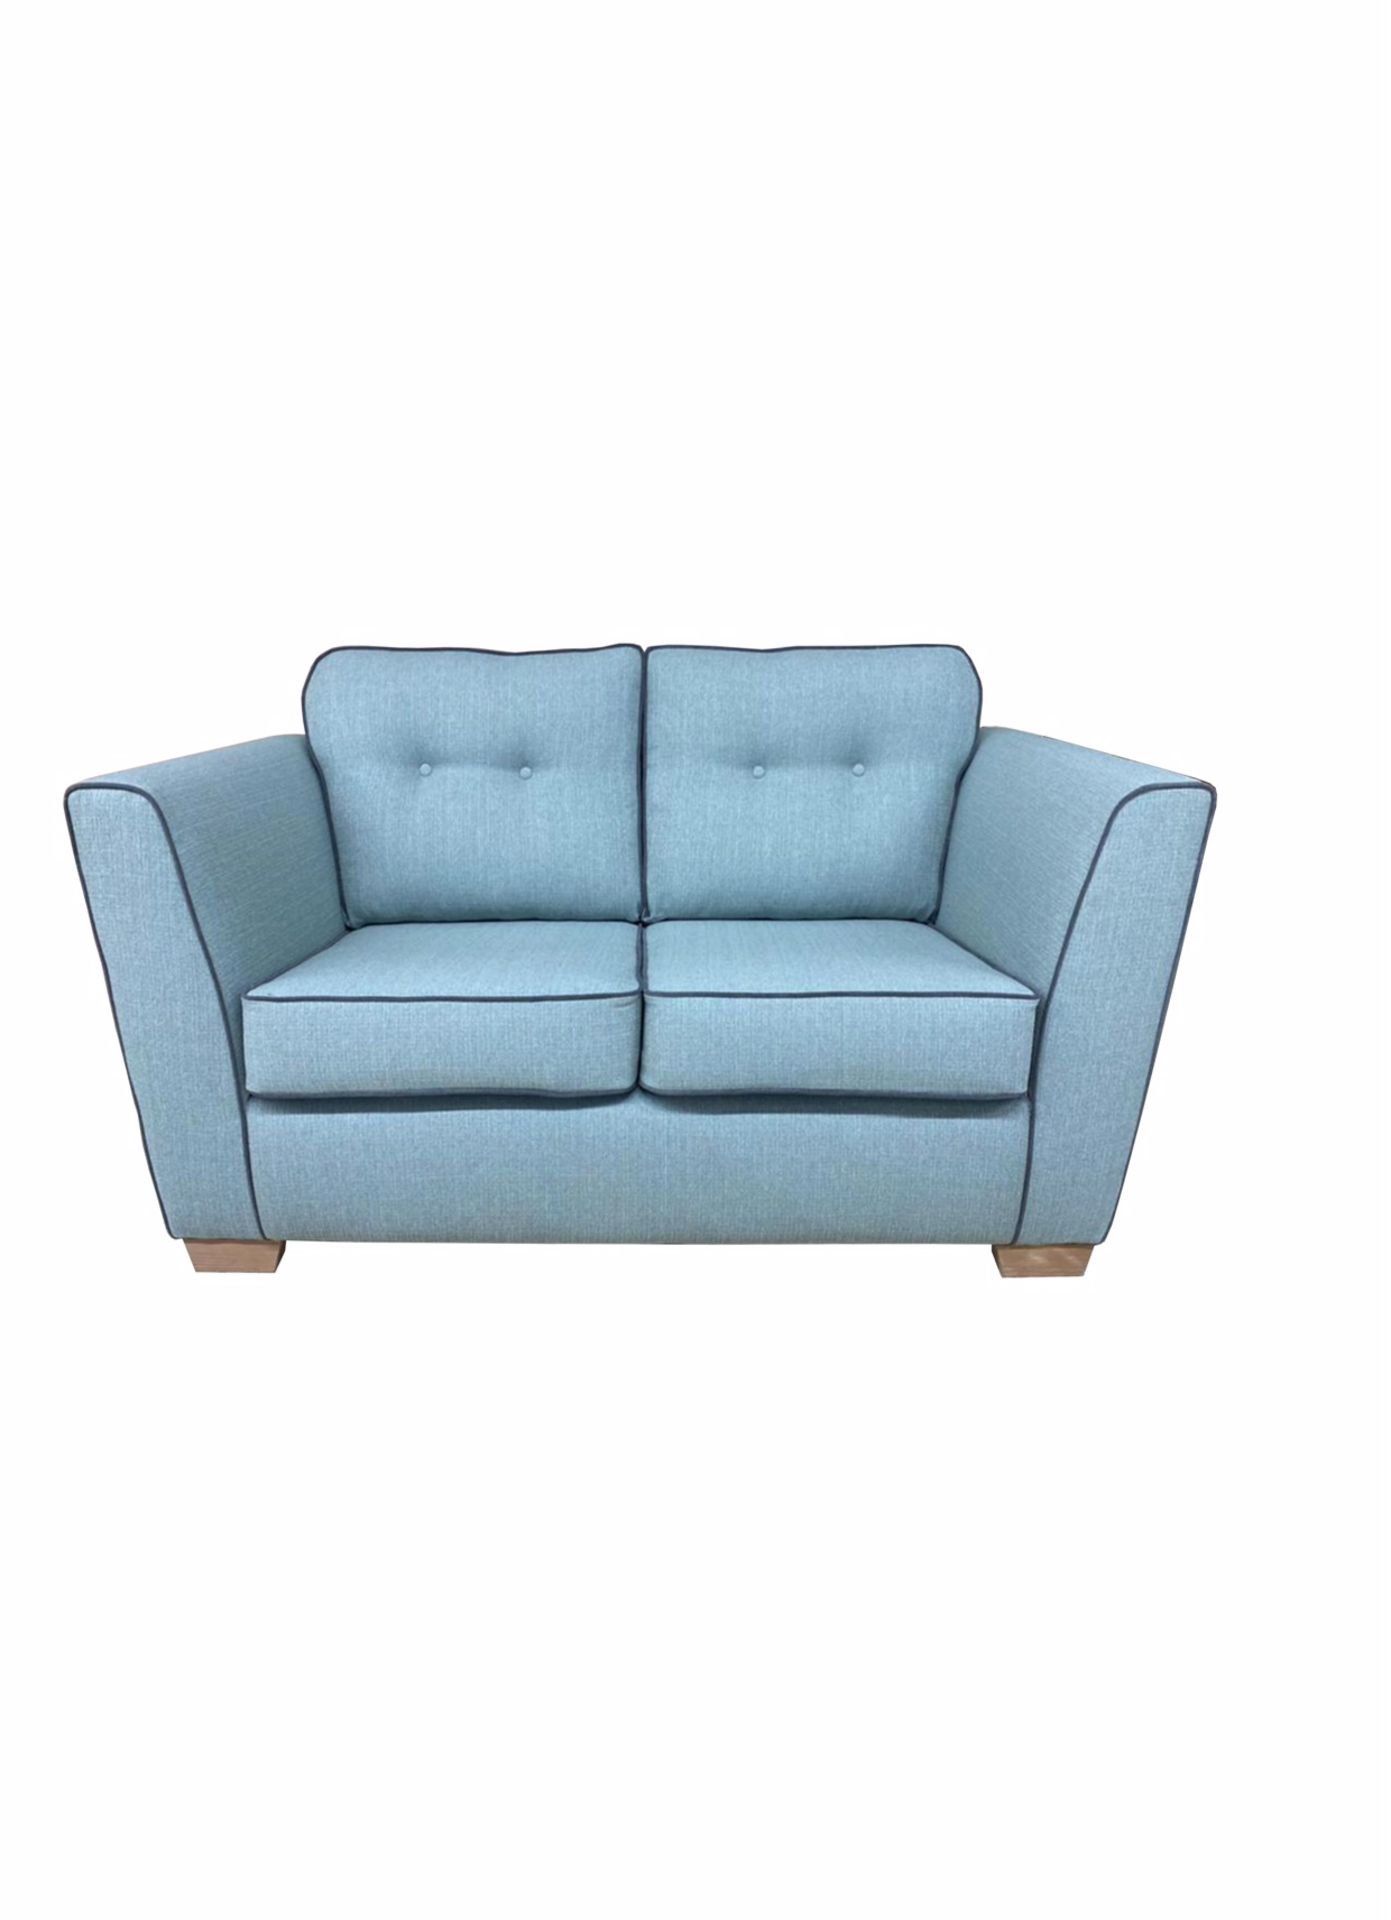 Brand new 3 seater plus 2 seater Dorset luxury fabric sofas in teal - Image 2 of 2